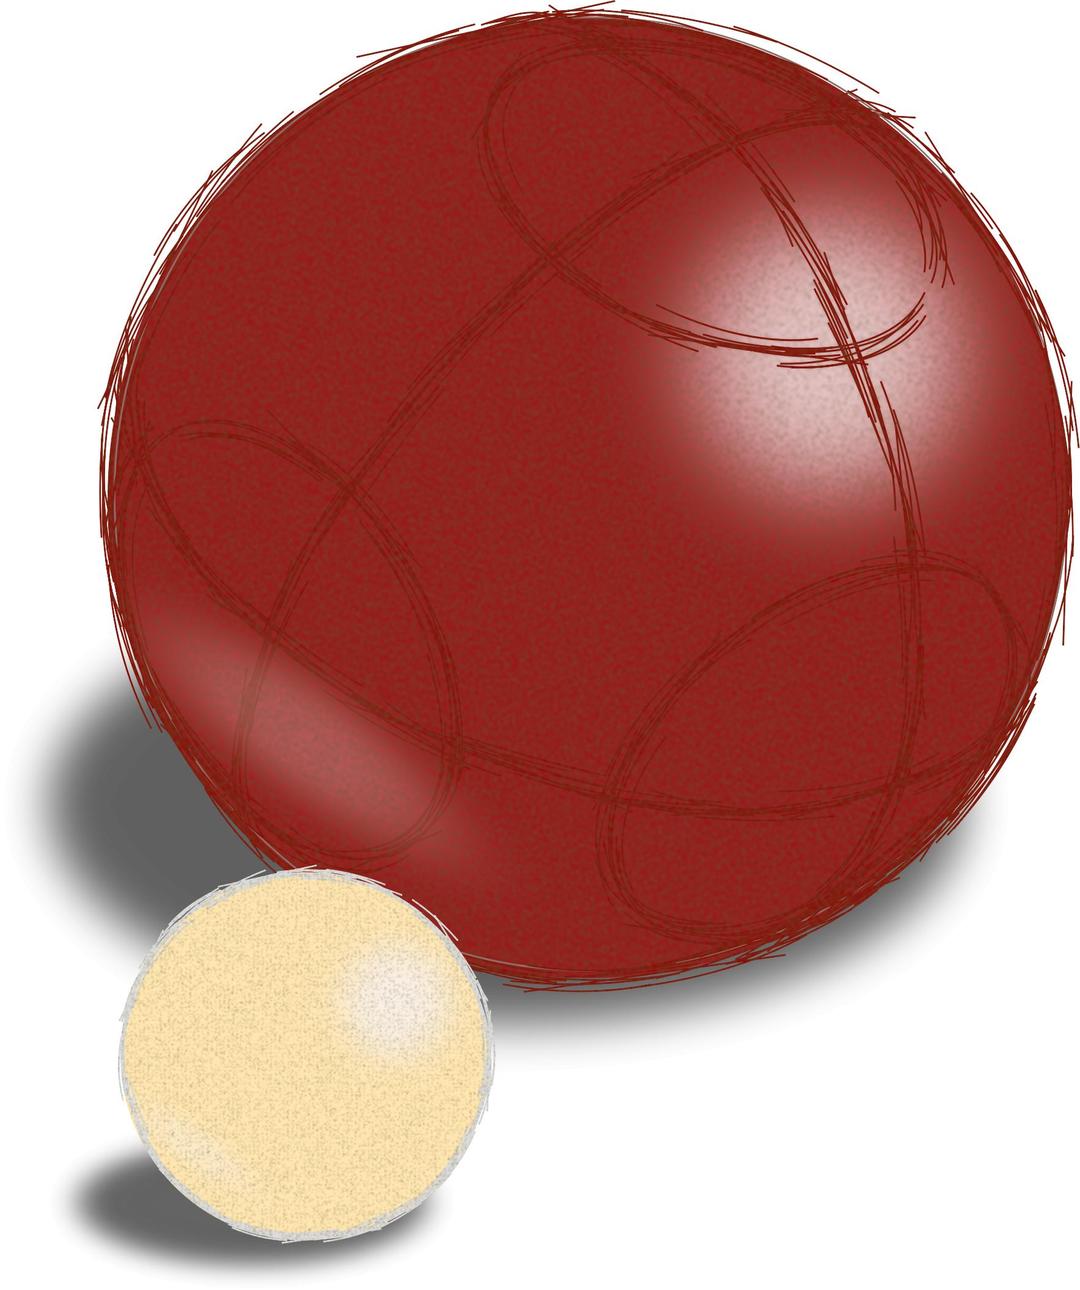 Sketchy Boccie Ball and Jack png transparent